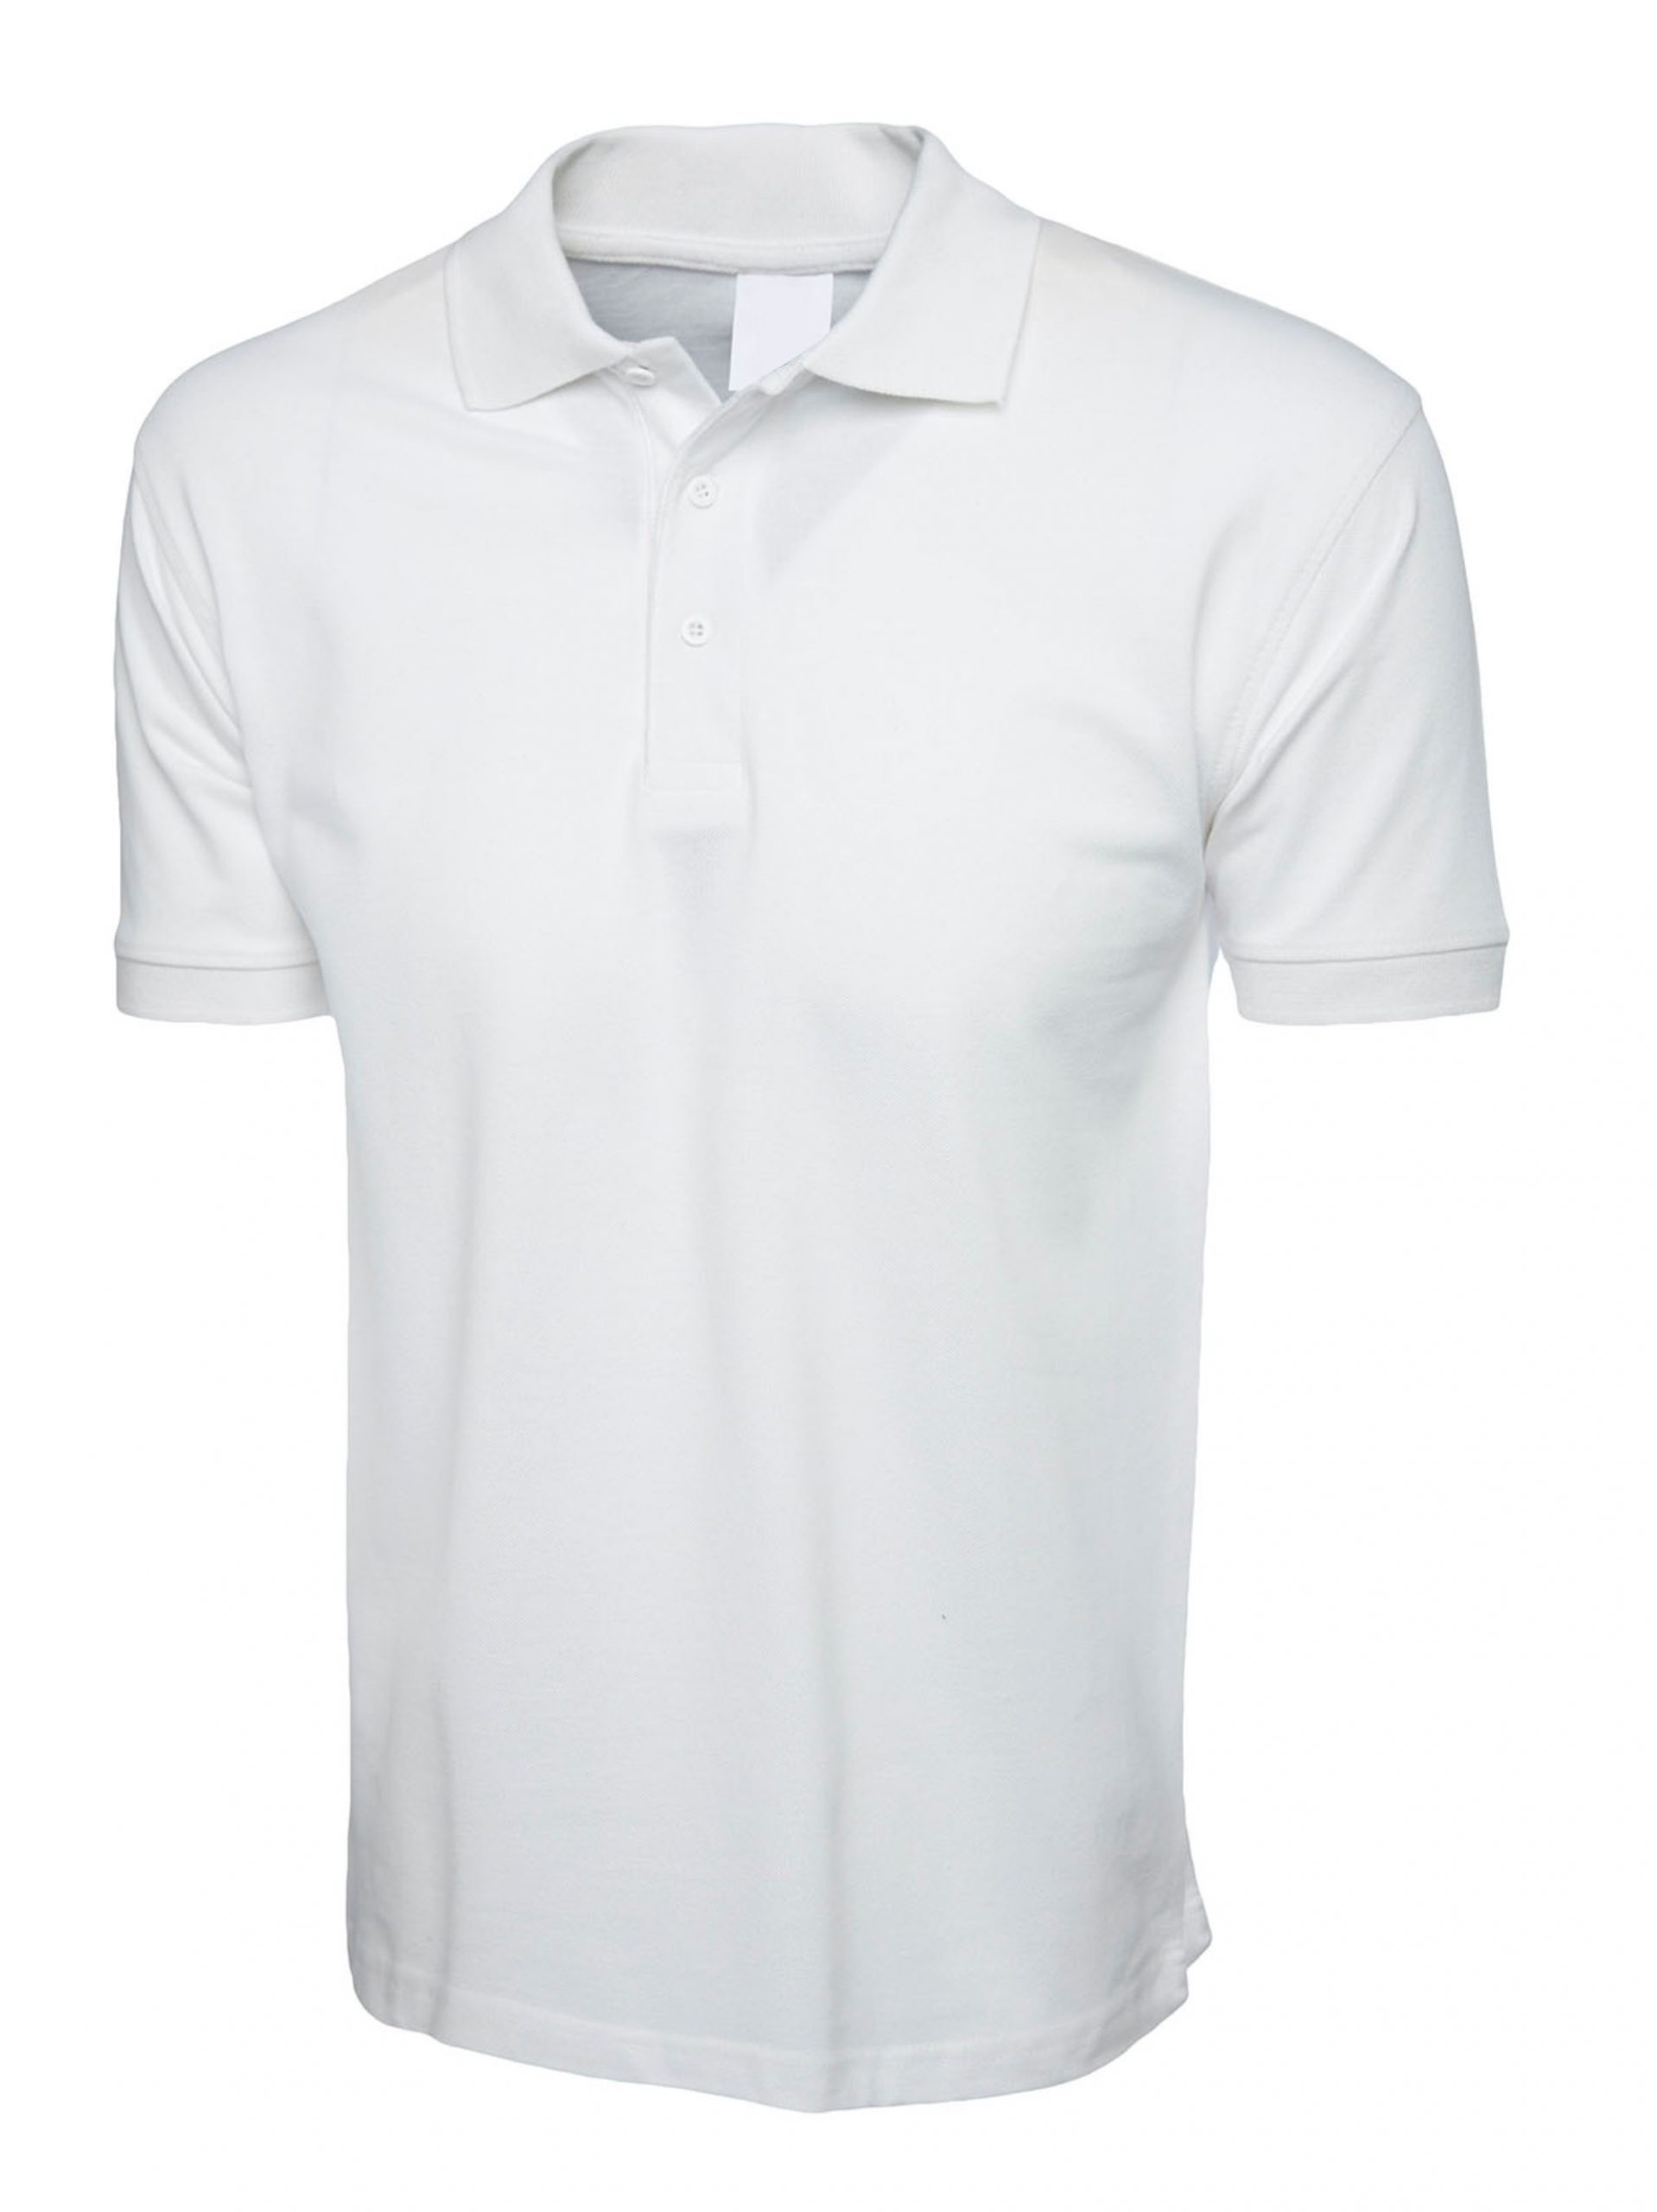 Custom Printed Polo T-shirt to buy in 2022 - UltiPrint